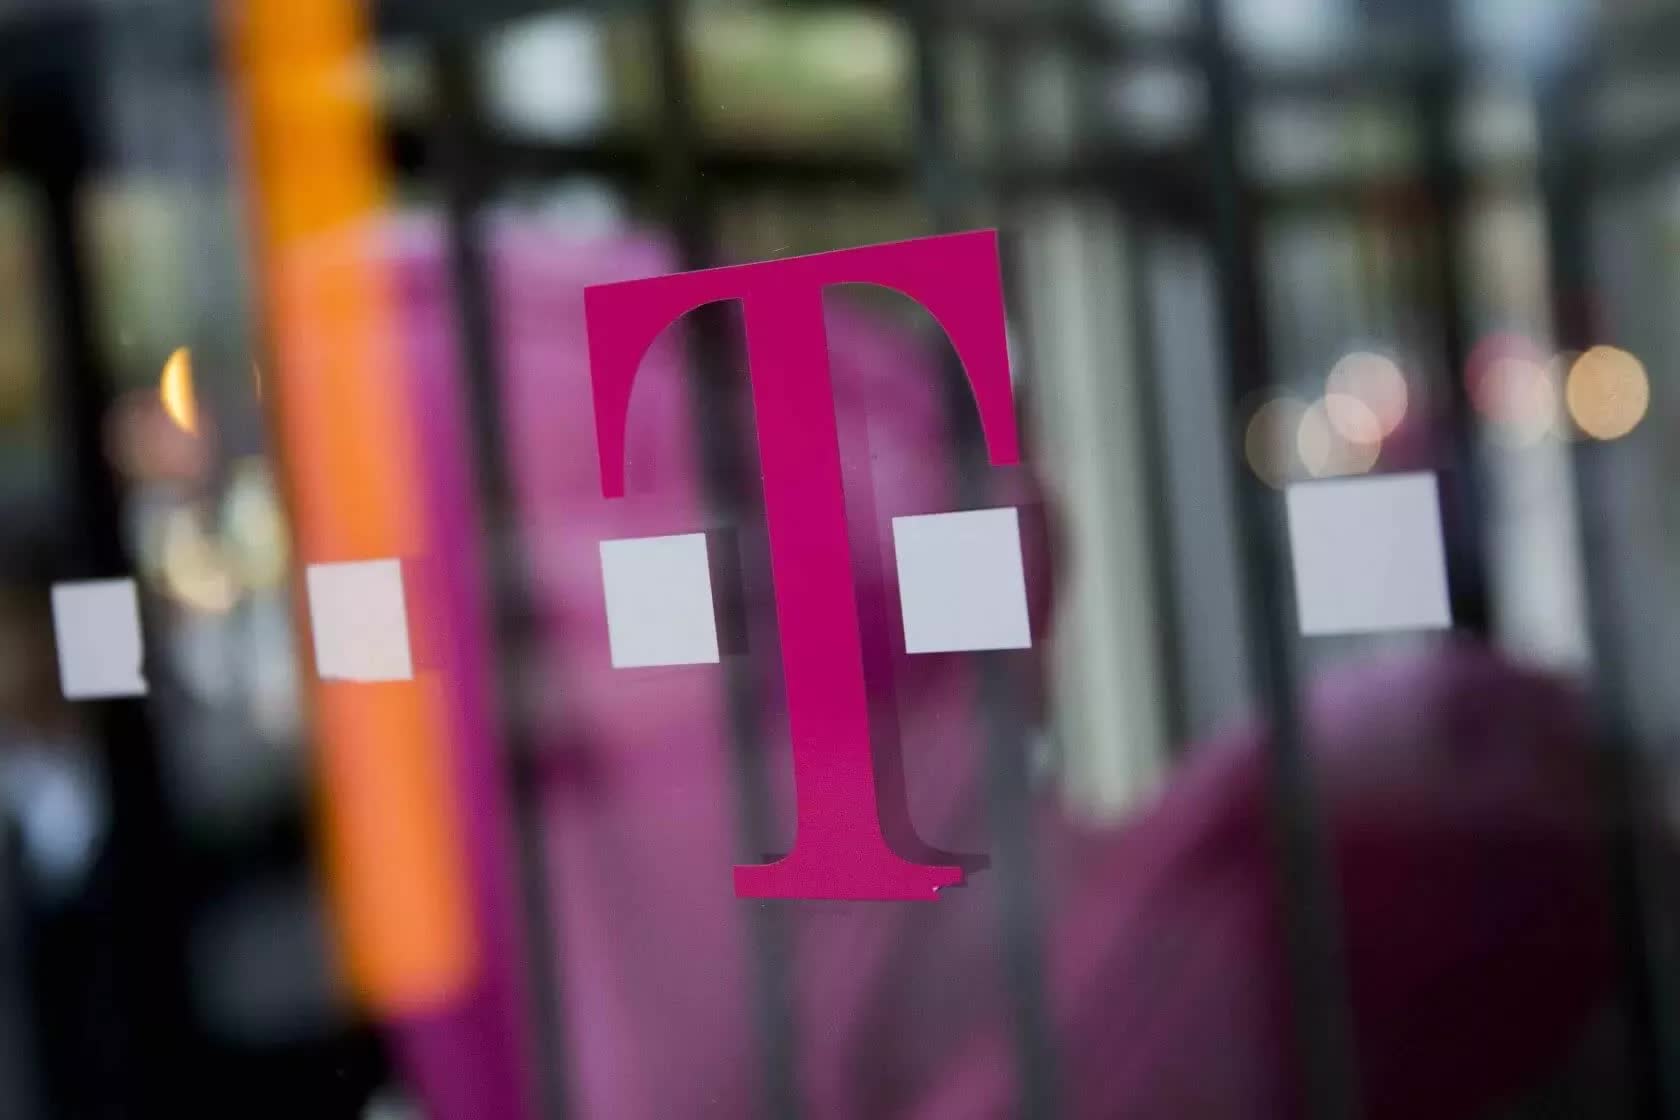 Nearly two dozen devices will stop working on T-Mobile's network next month